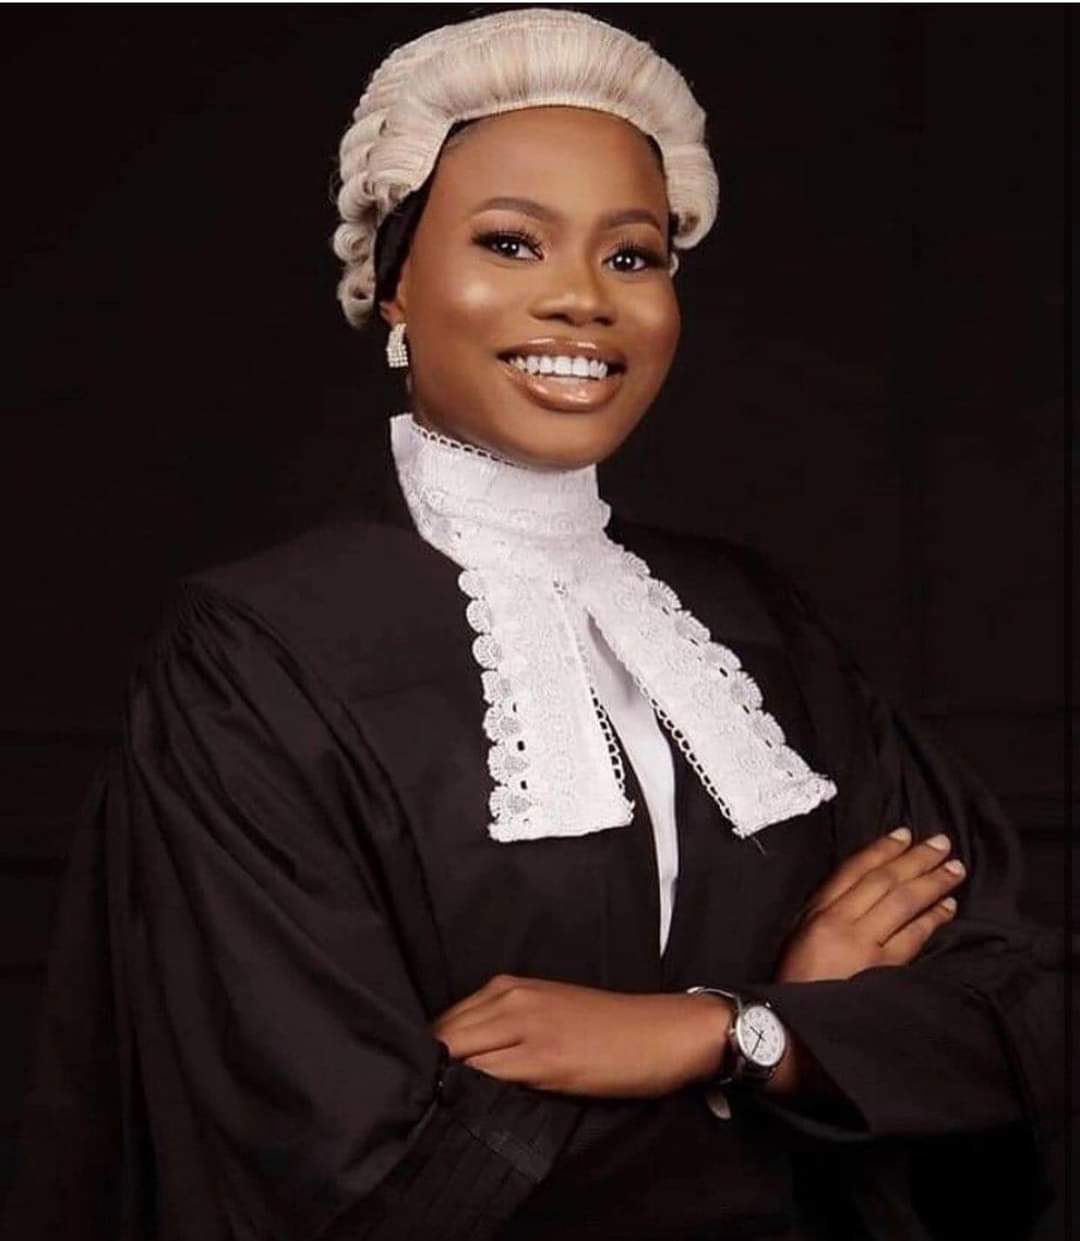 Meet Barr Bukola Who Has Won Best Graduating Student In All Schools She Attended Including Law School Where She Won 16 Awards